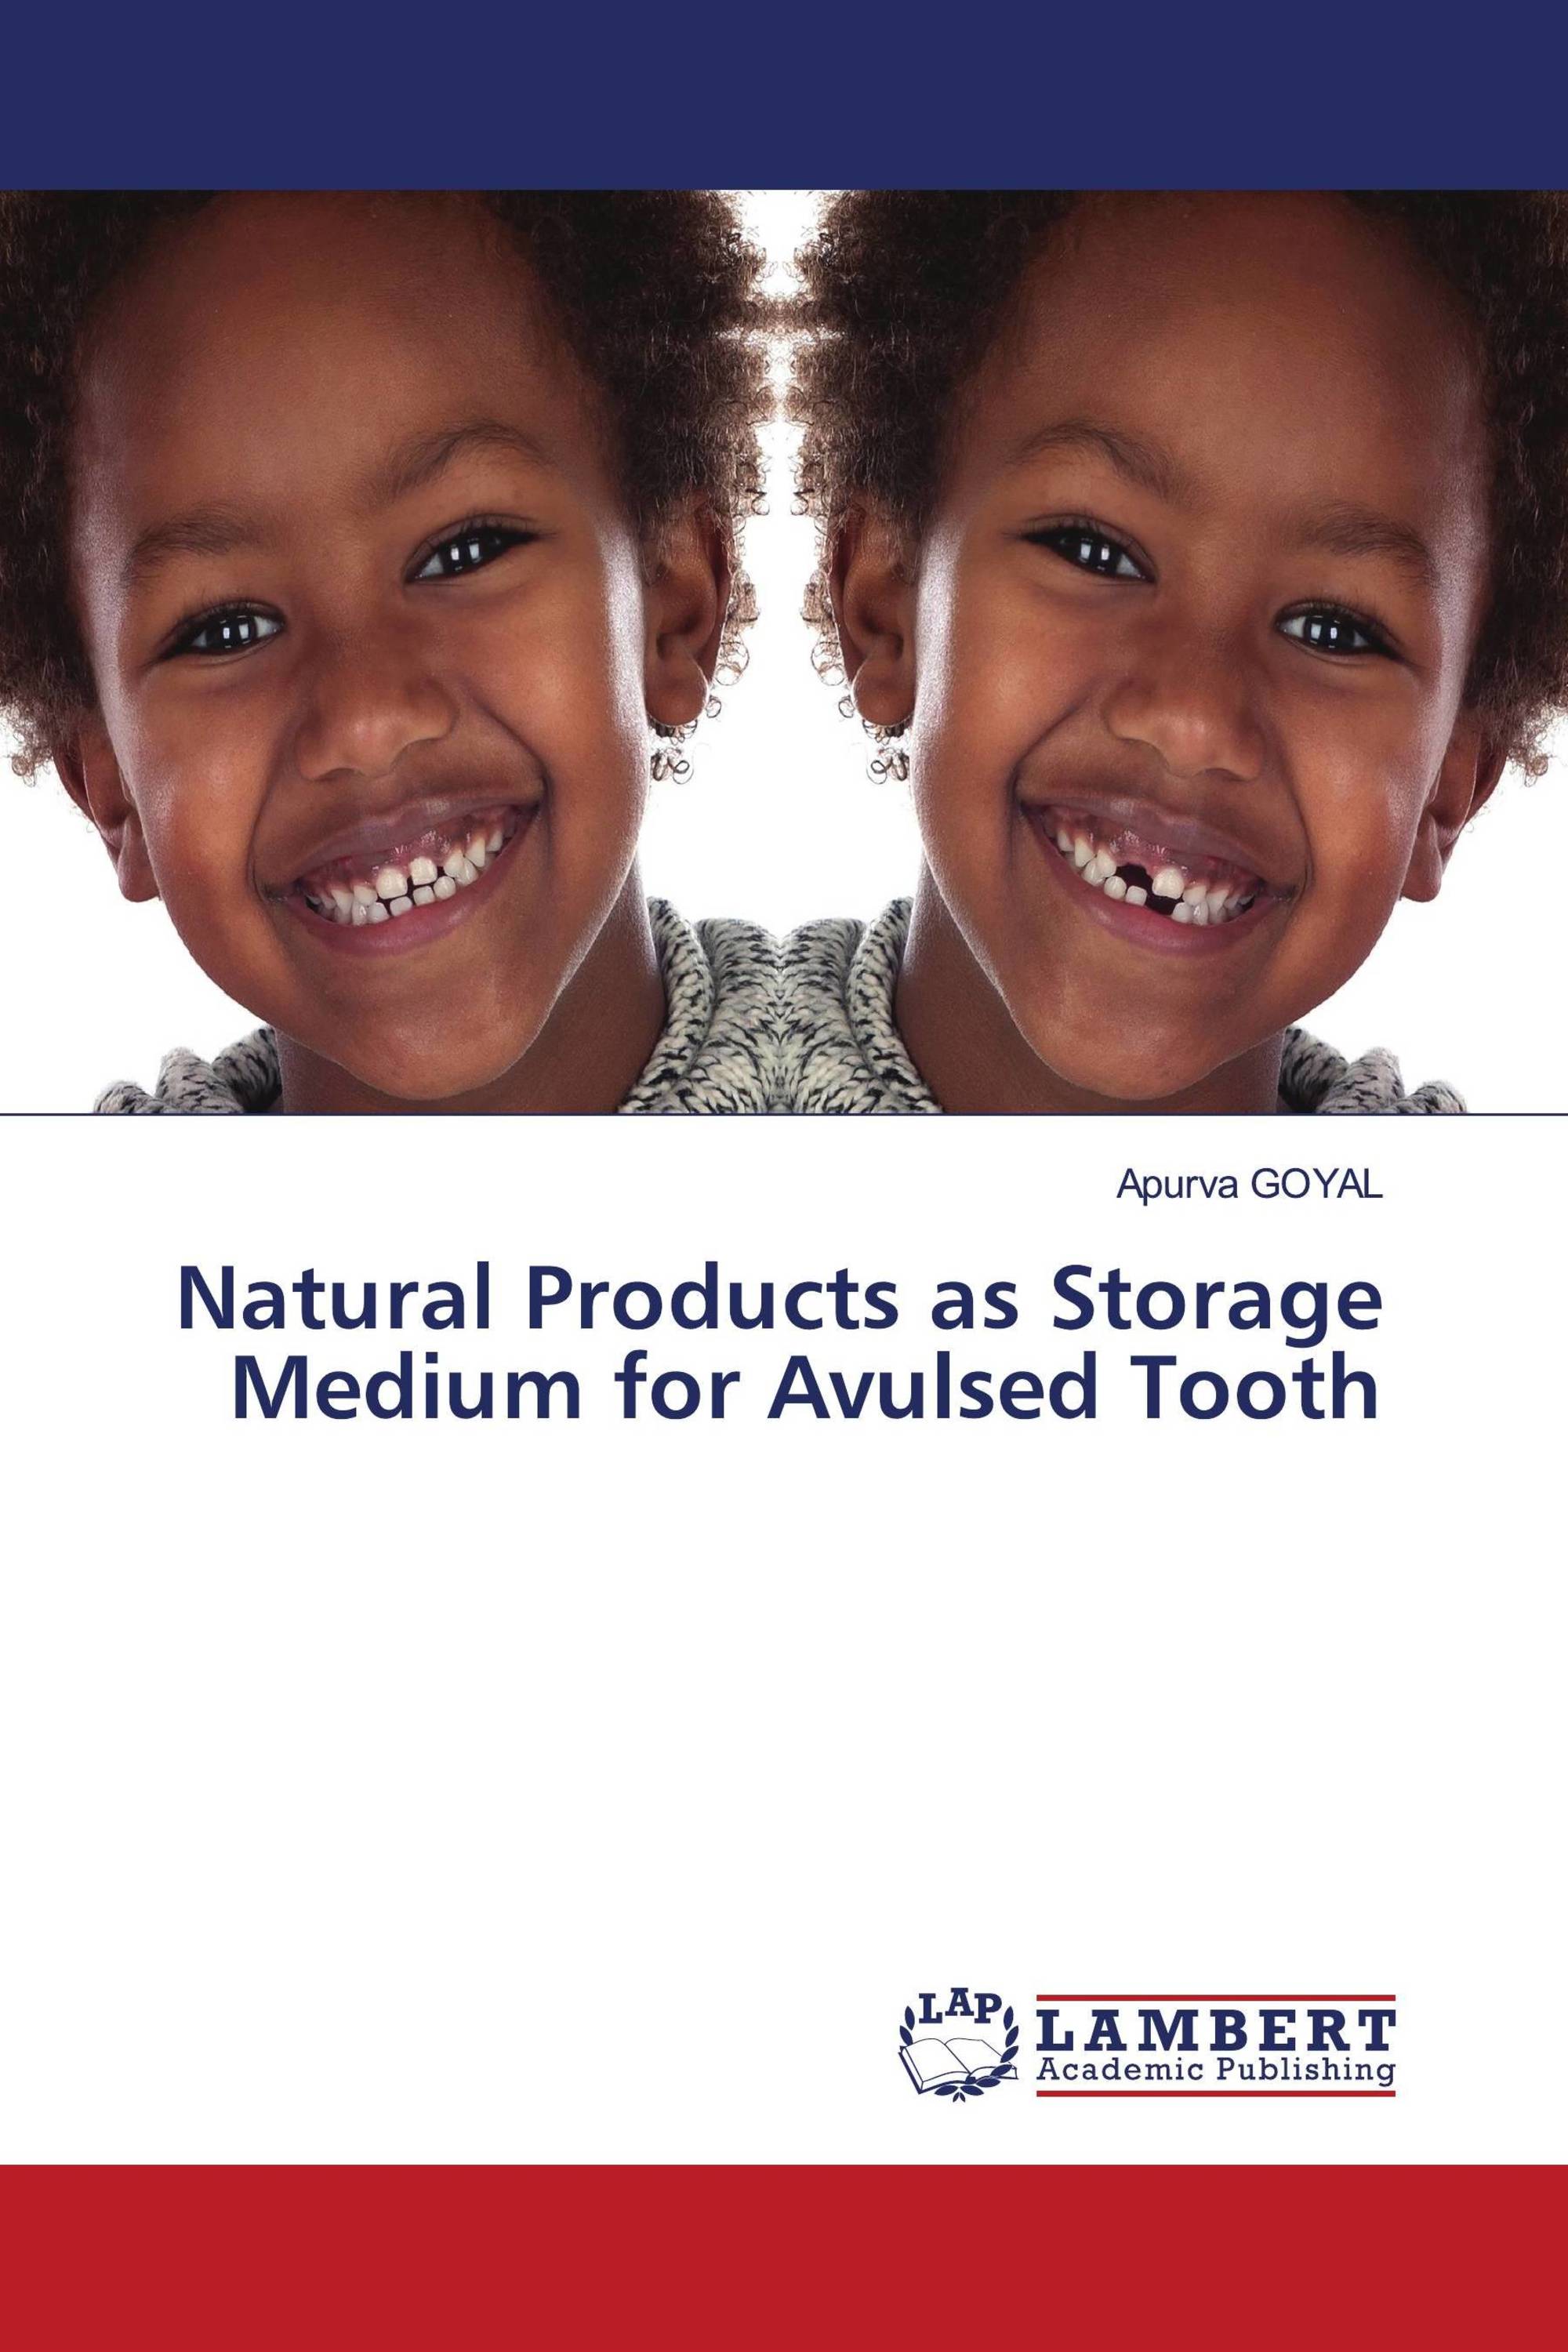 Natural Products as Storage Medium for Avulsed Tooth